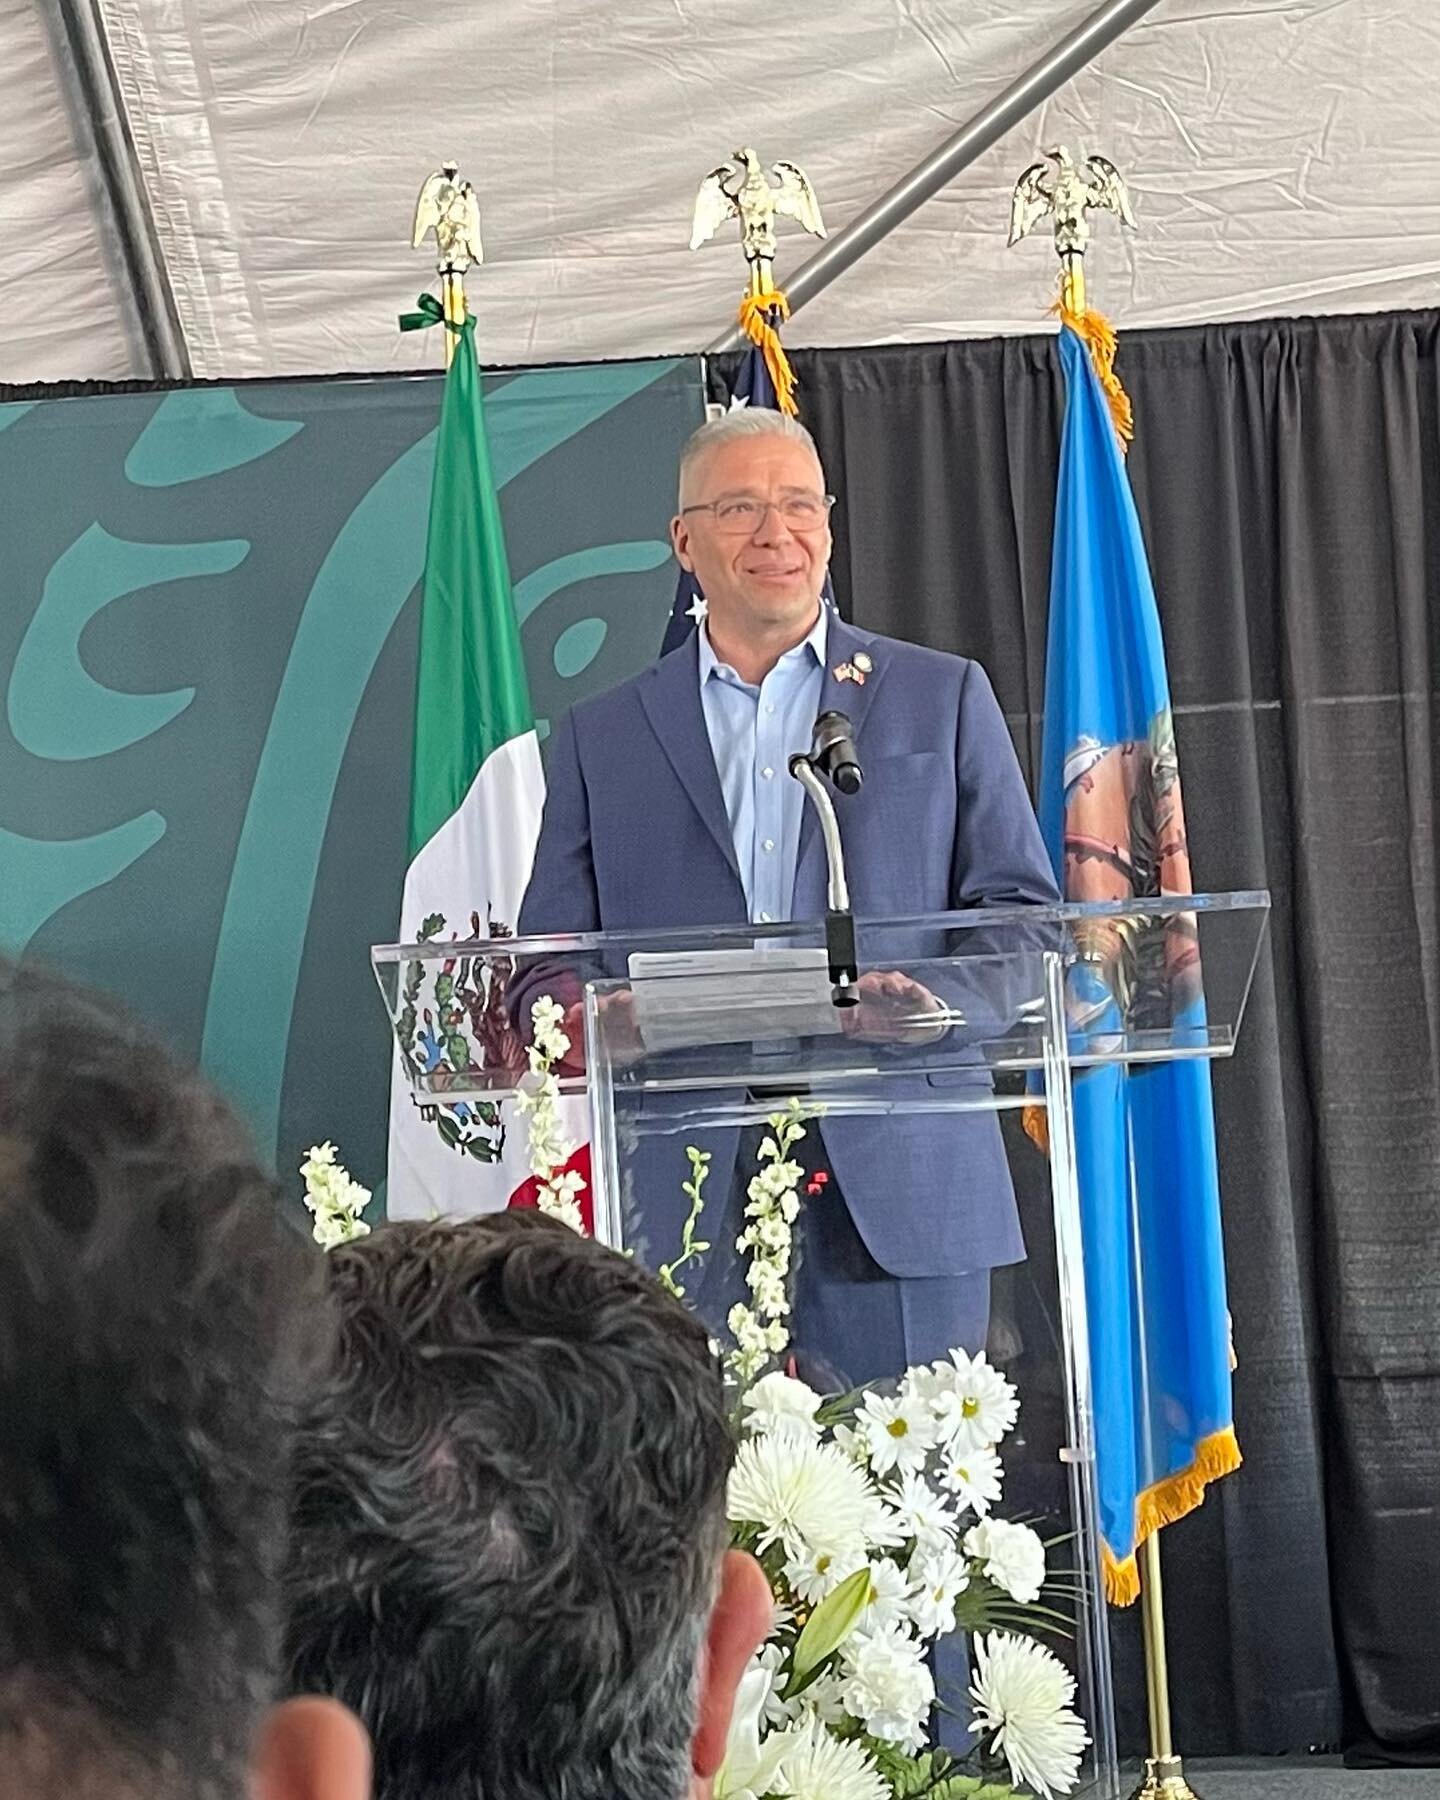 The Mexican Consulate has officially opened in OKC! Sen. Michael Brooks-Jimenez shared his story at the inauguration ceremony this morning! 🇲🇽🇺🇸